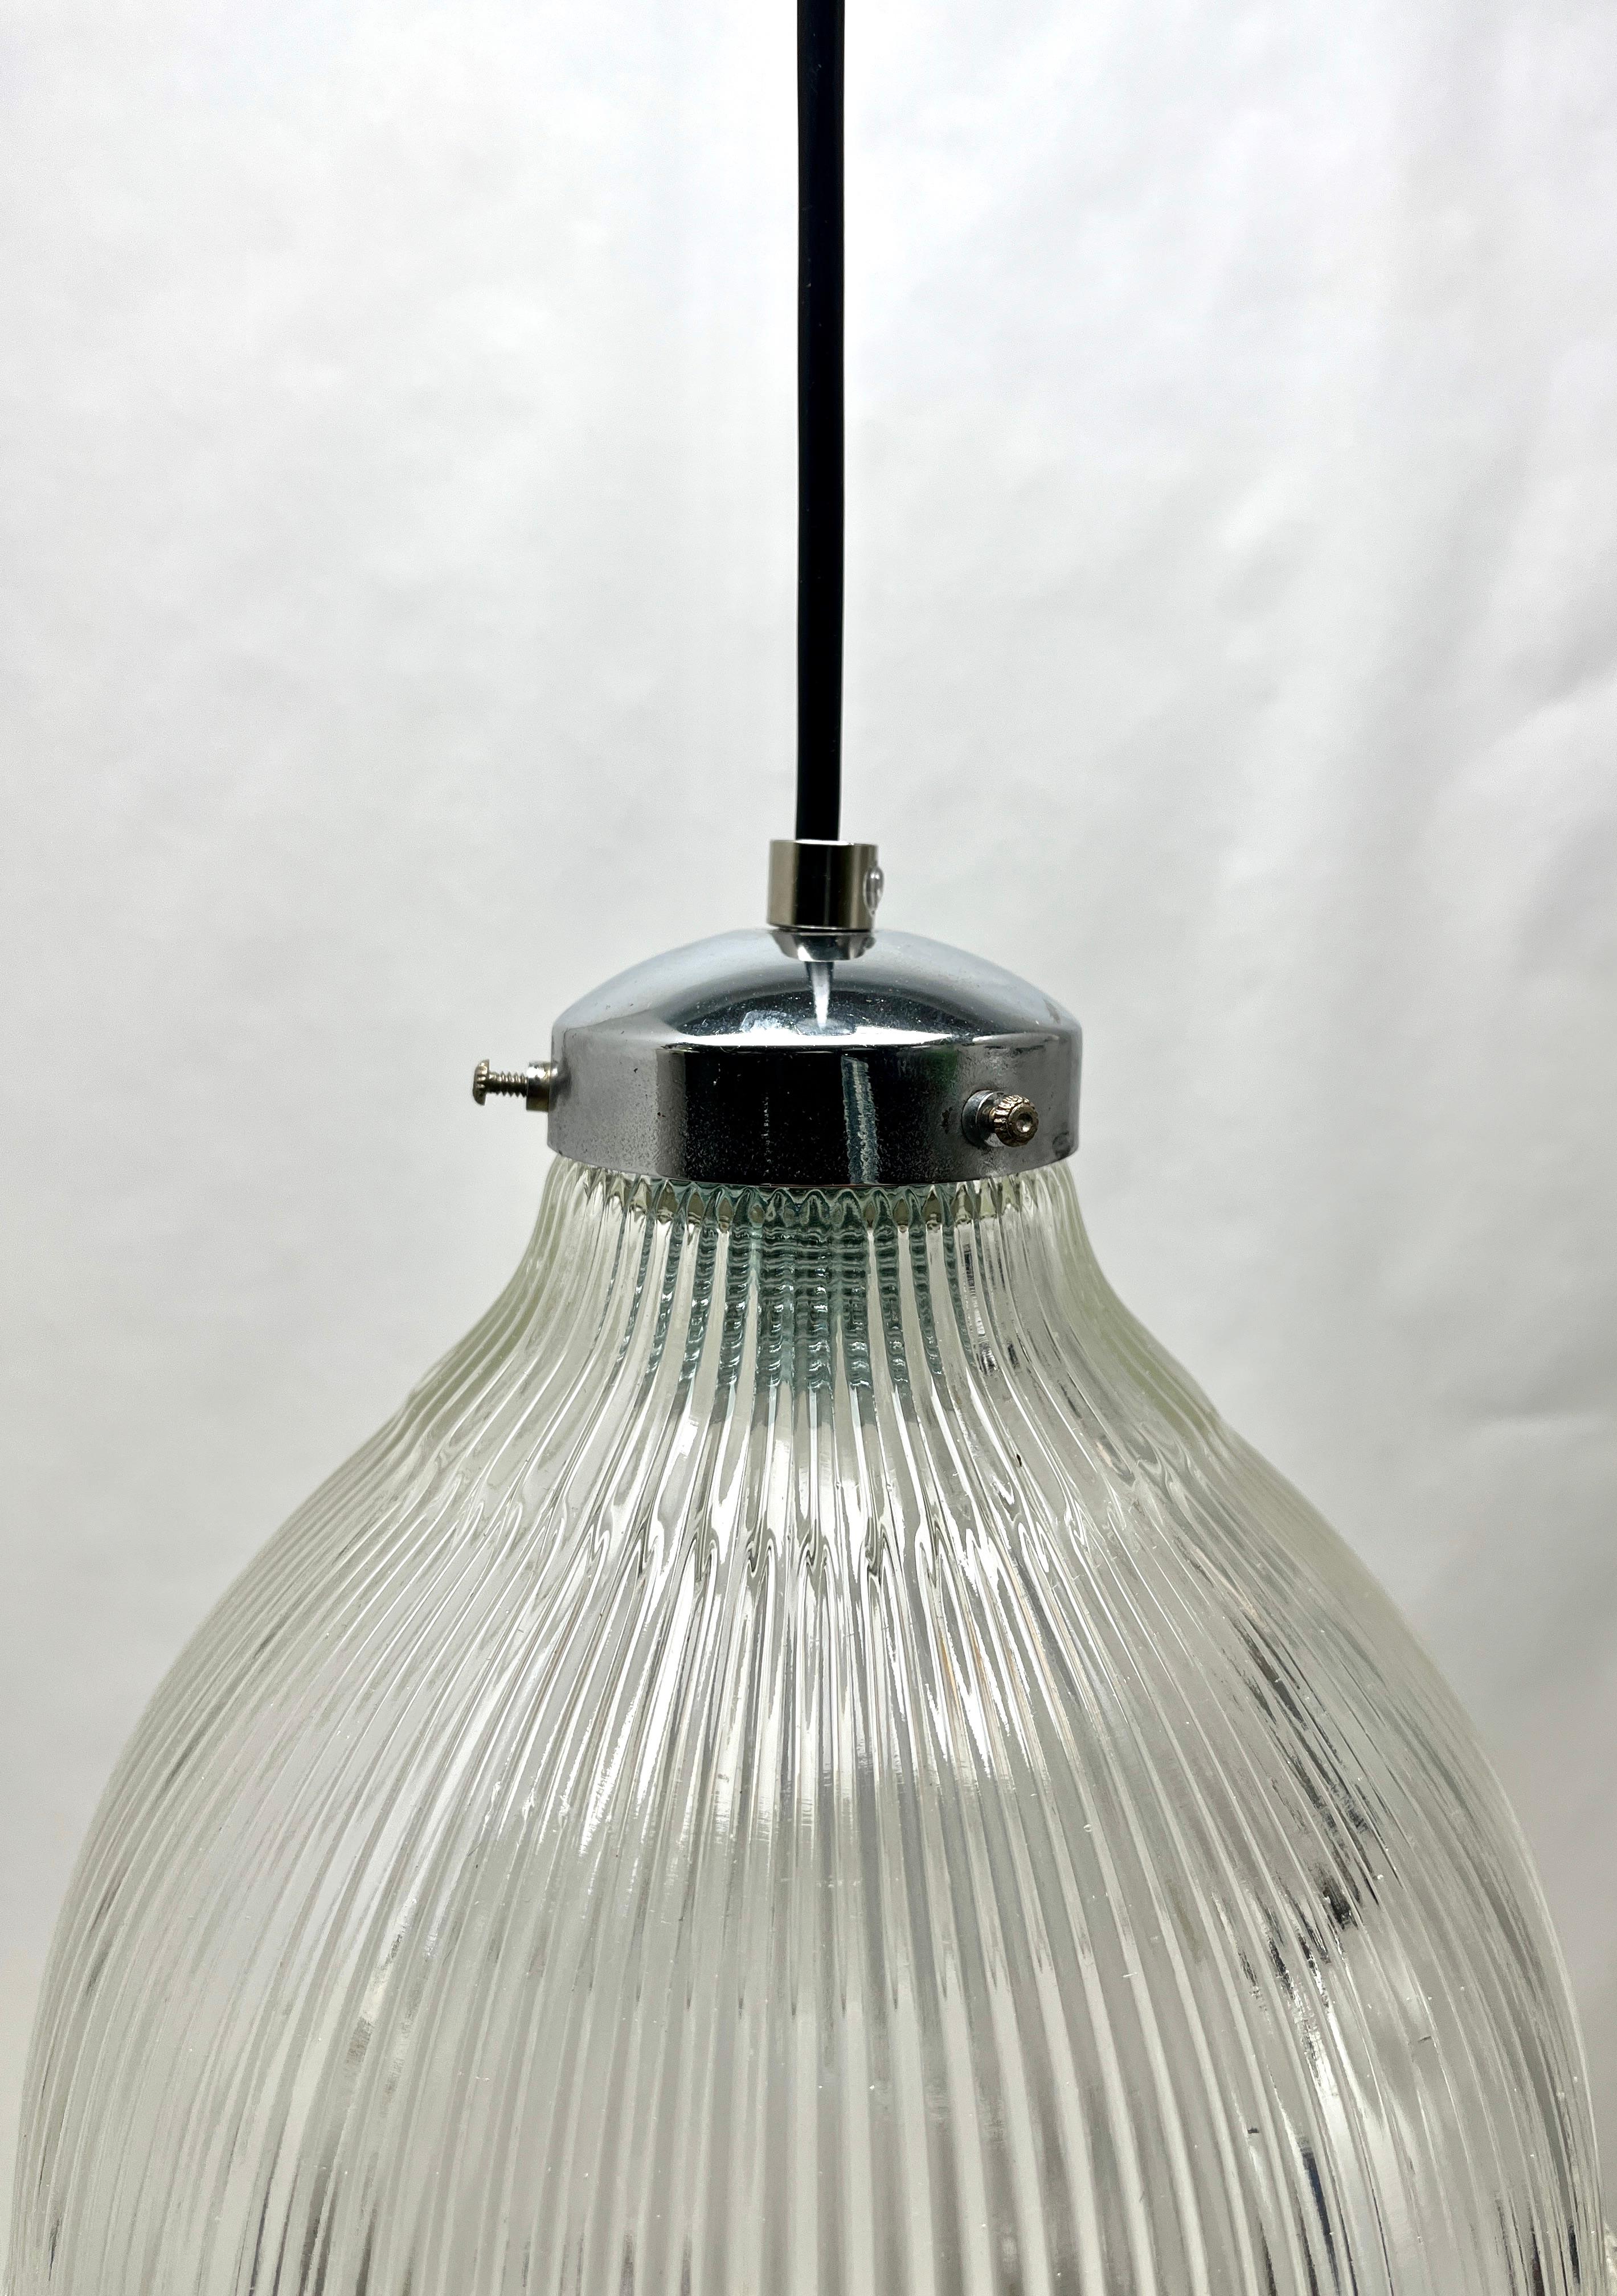 The lamp has a fitting on a chromed plate and holds a Corrugated glass shade 

In good condition and in full working order with standard new lamp fittings E27
With new wiring and has been checked carefully.
The lamp is provided with a screw